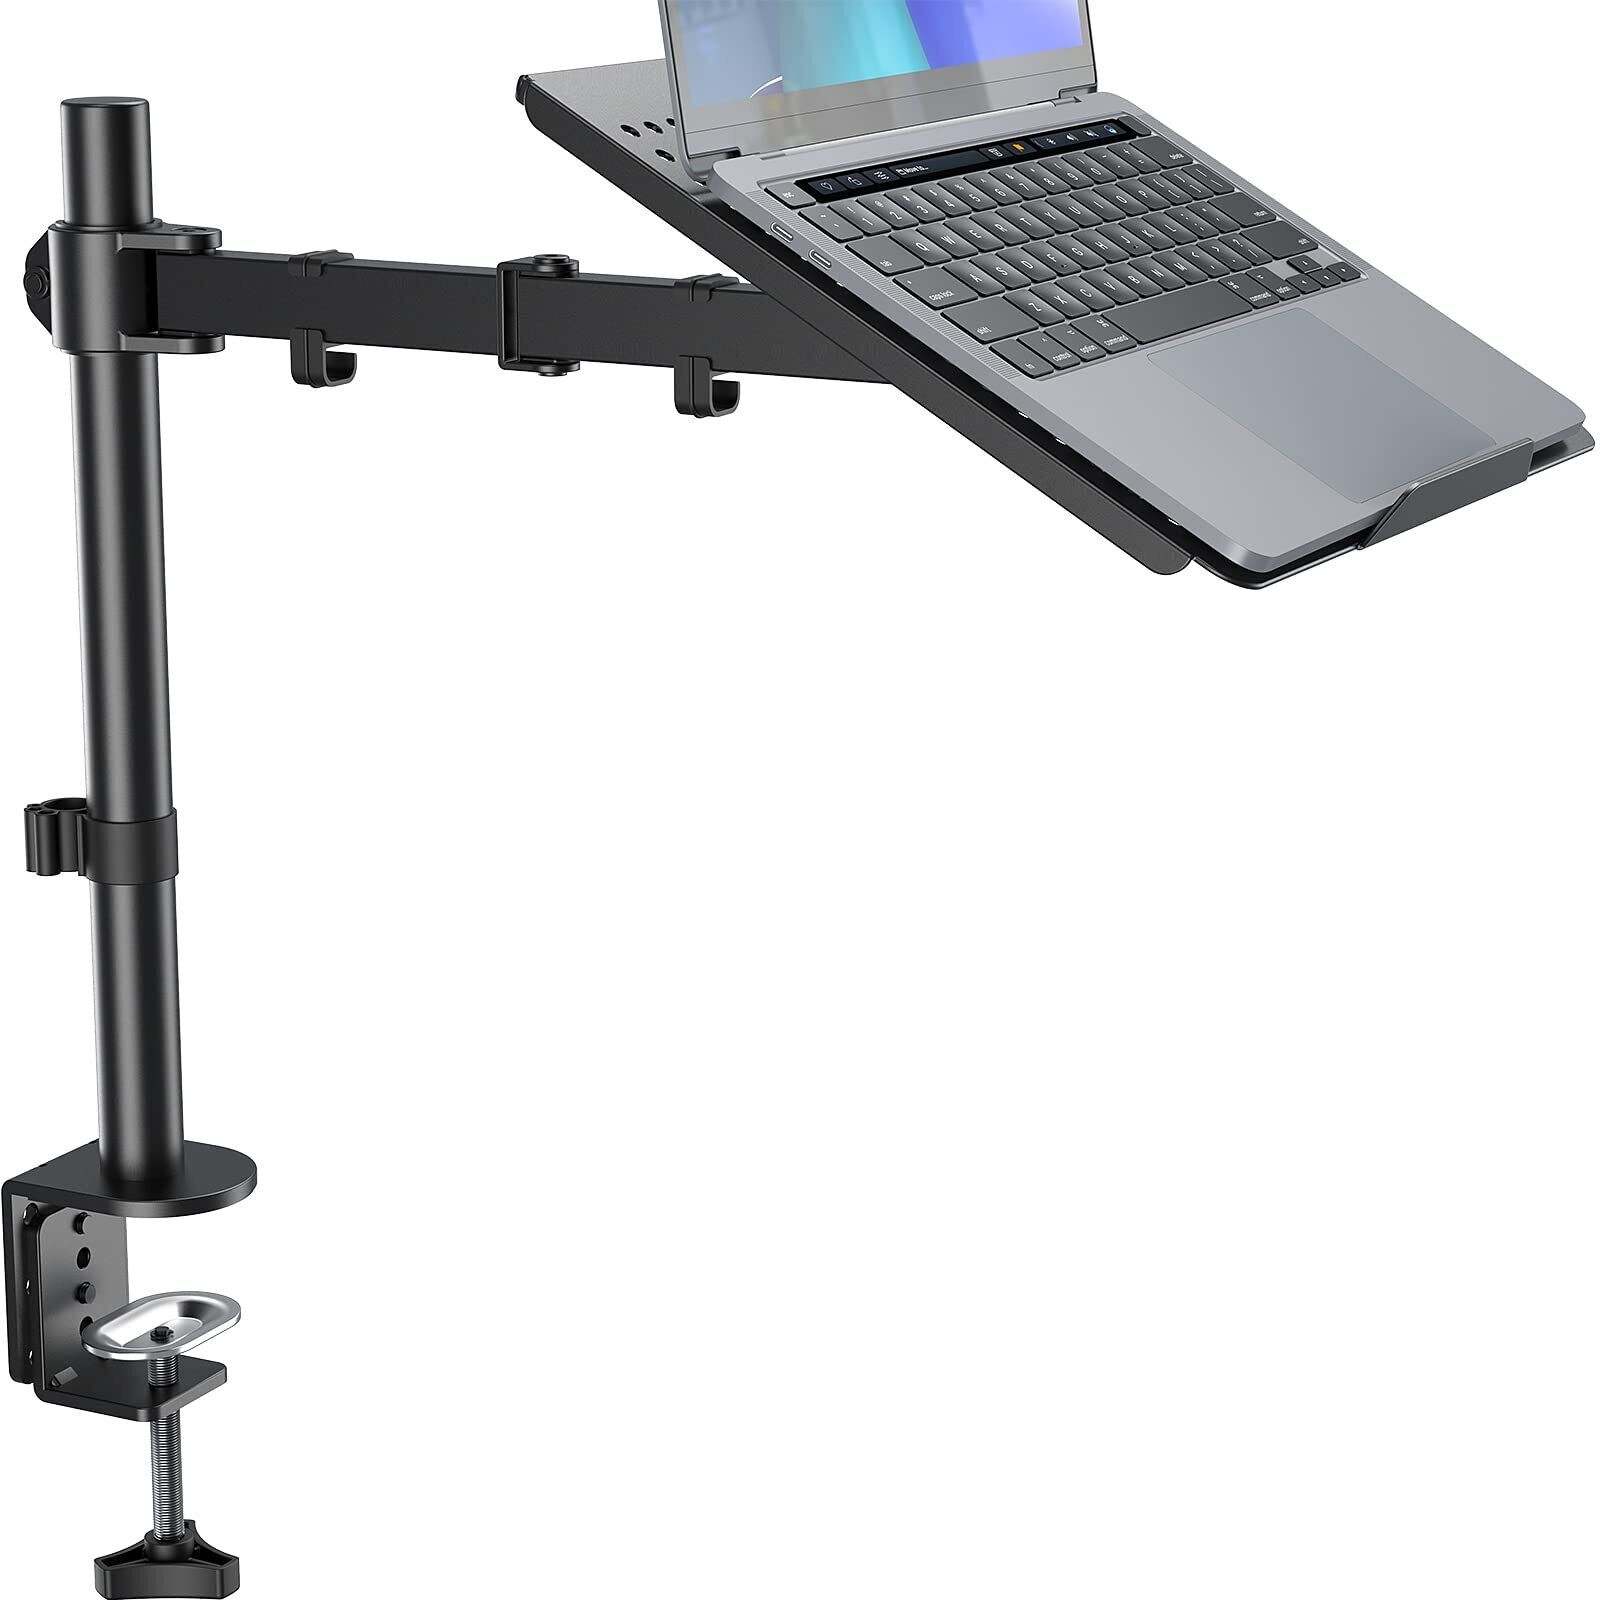 Laptop Desk Mount with Tray Single Laptop Mount for Notebook up to 17 inch Ad...